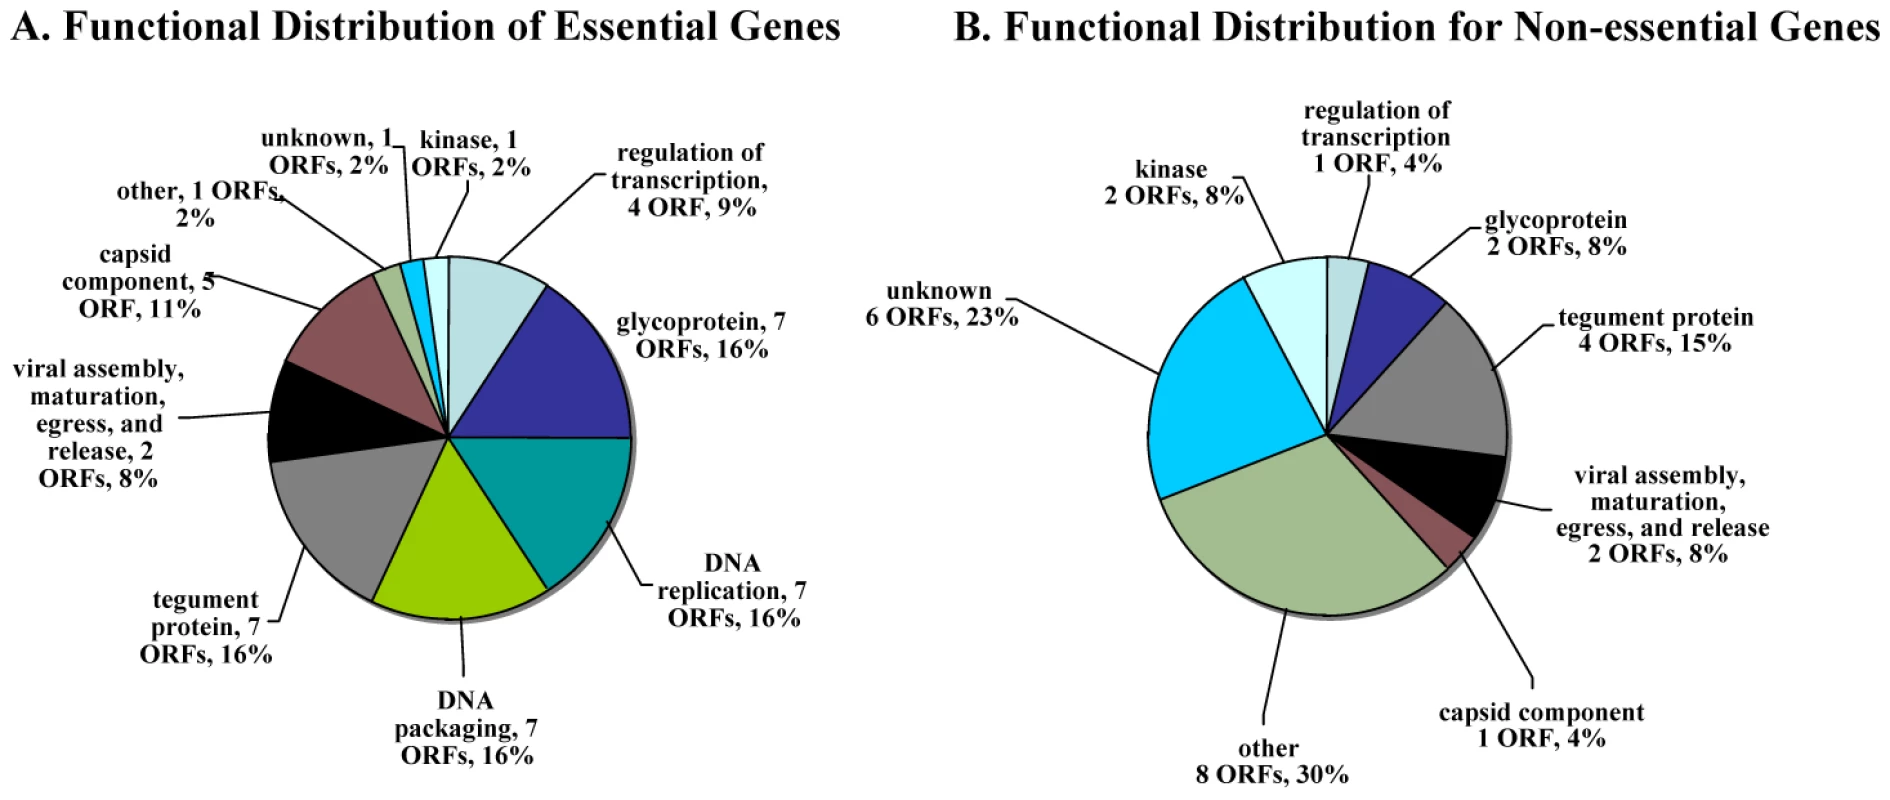 Distribution of functional annotations for essential and non-essential genes.